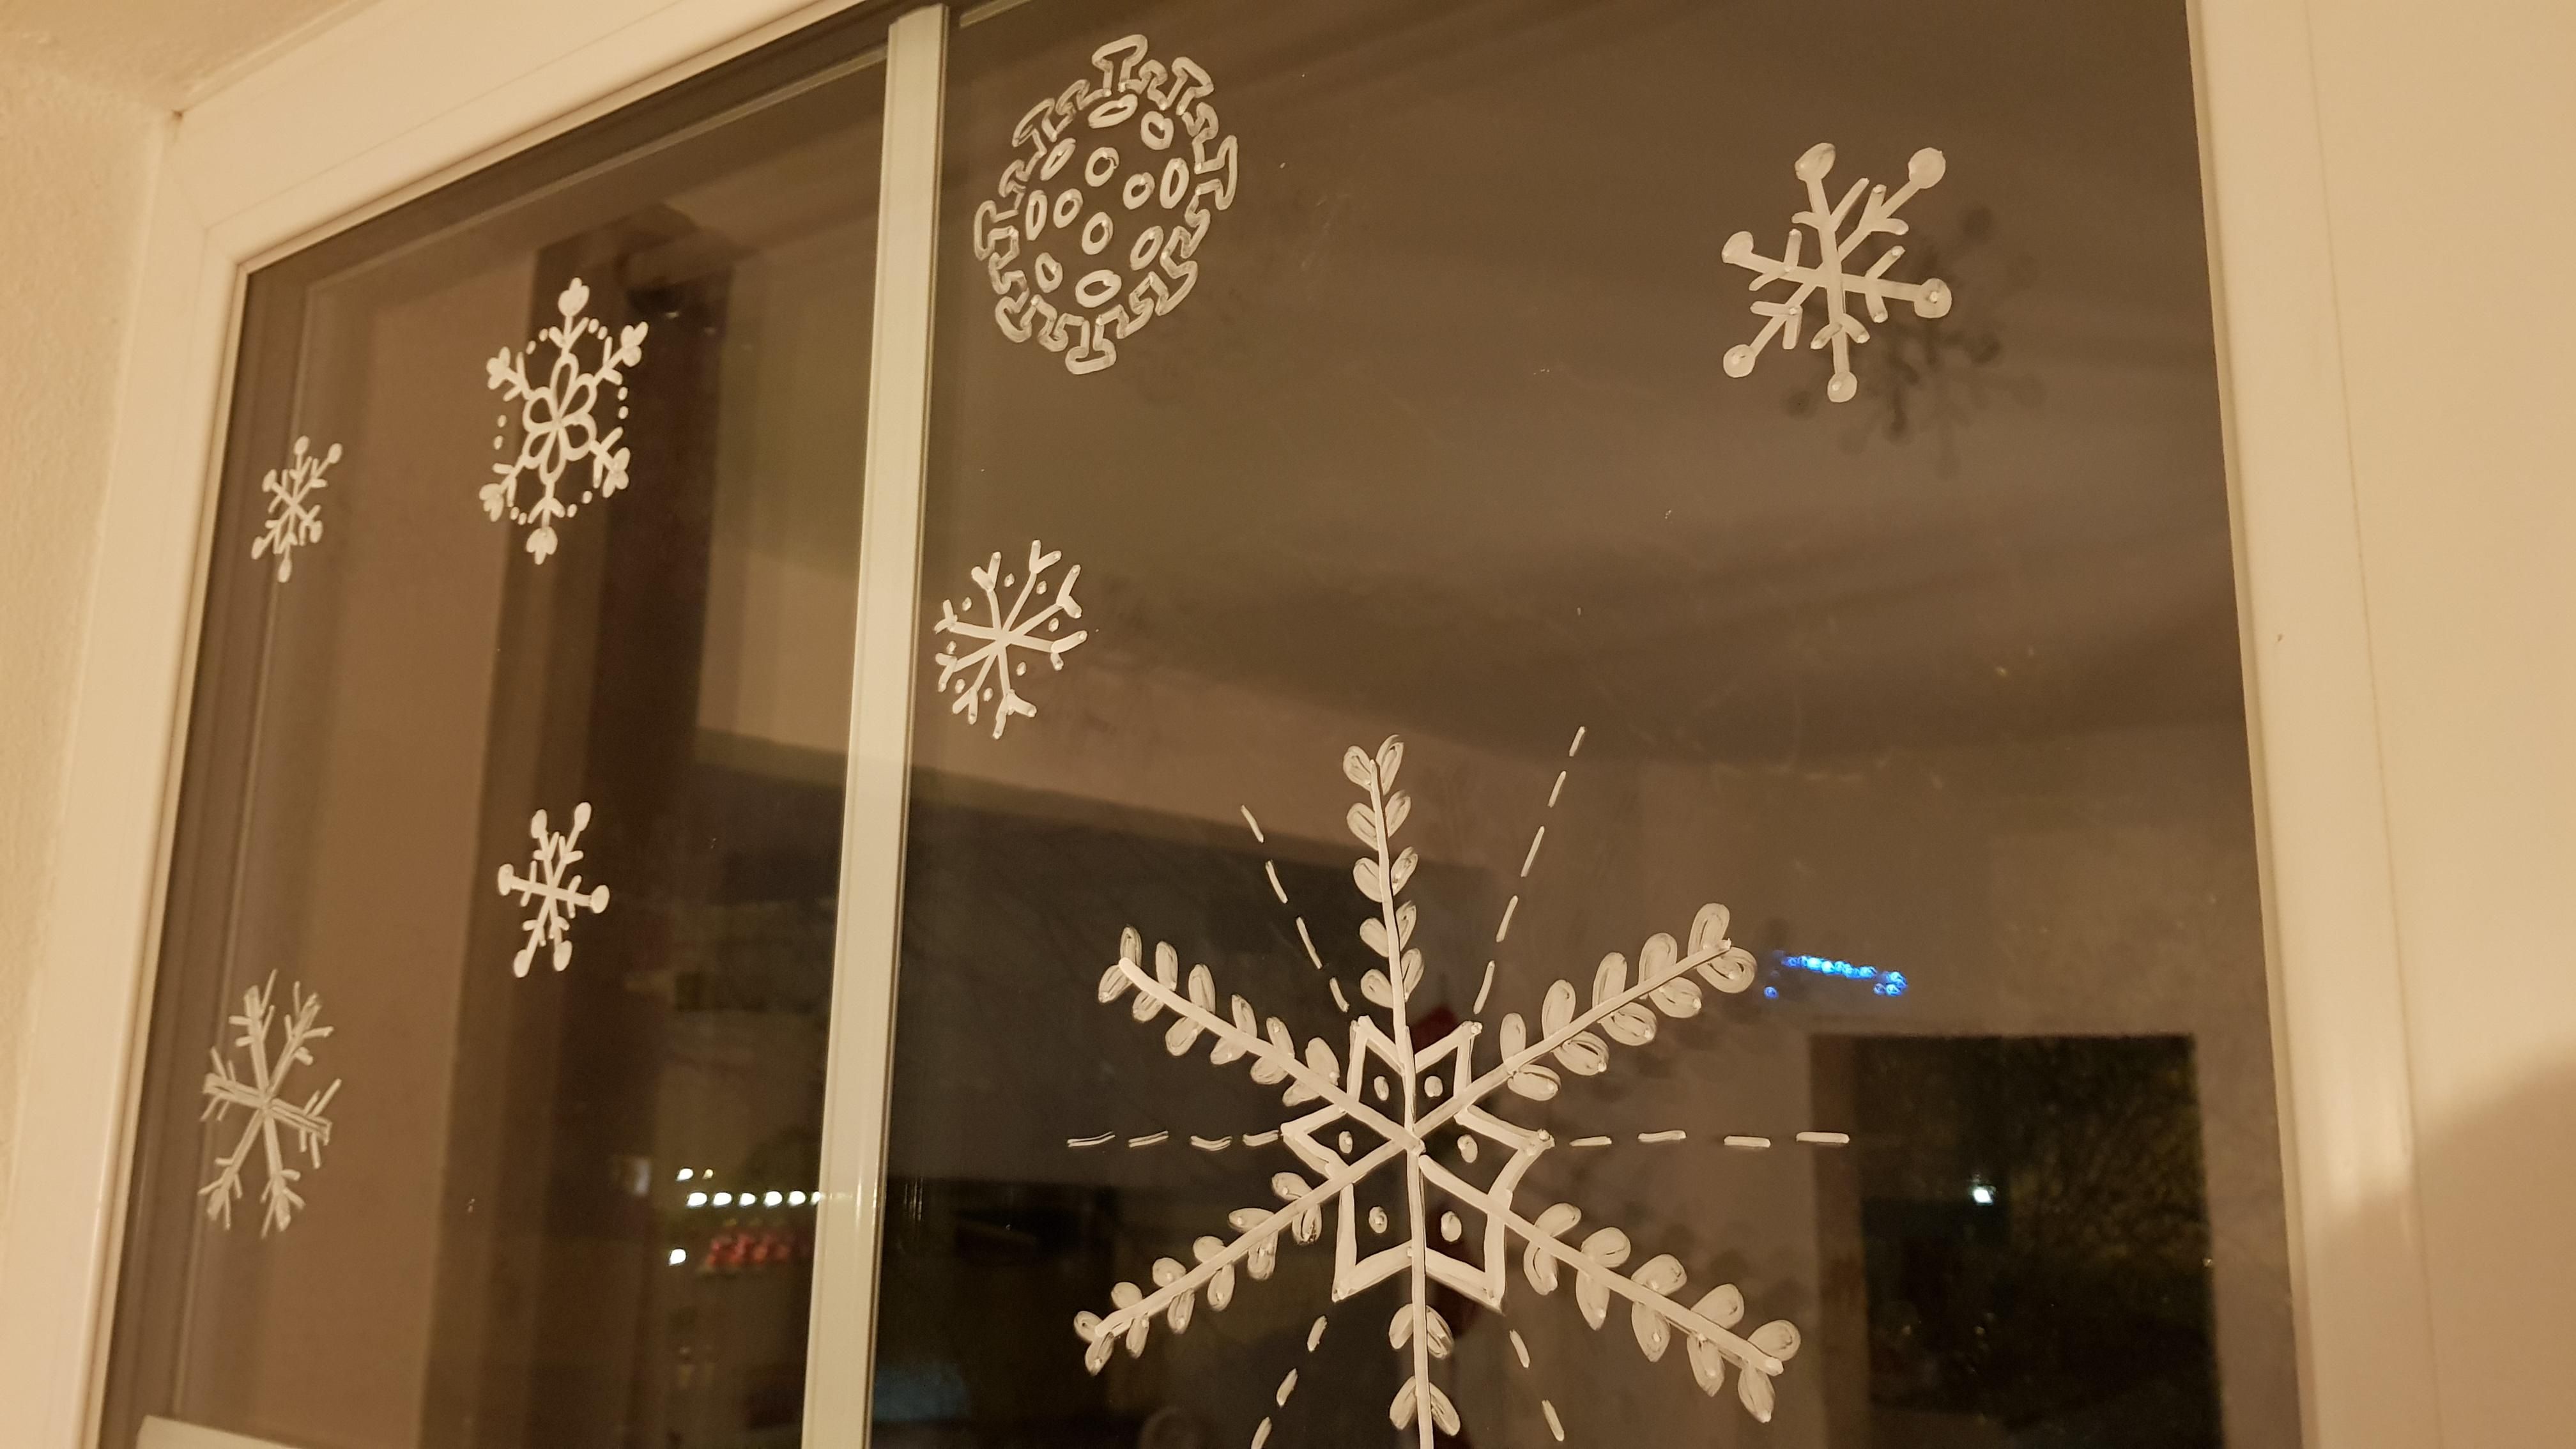 One of these snowflakes is sus.